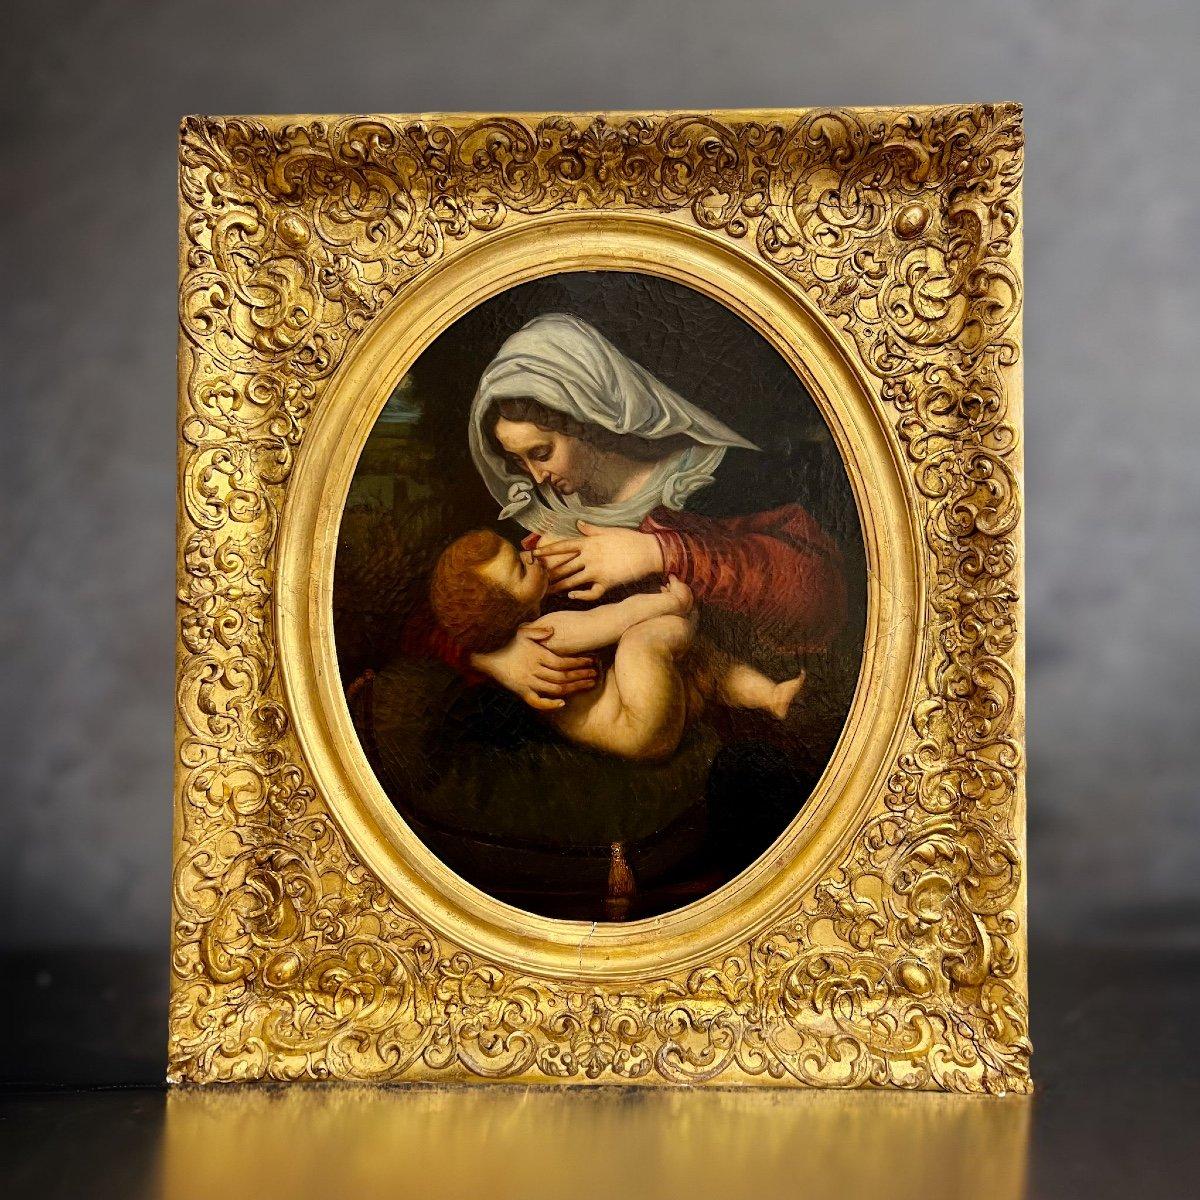 Very fine 19th century oil painting of the Virgin and Child, oil on canvas, in a massive carved and gilded wooden frame. 
The painting is of the French school, probably inspired by a similar painting by a better-known artist.

